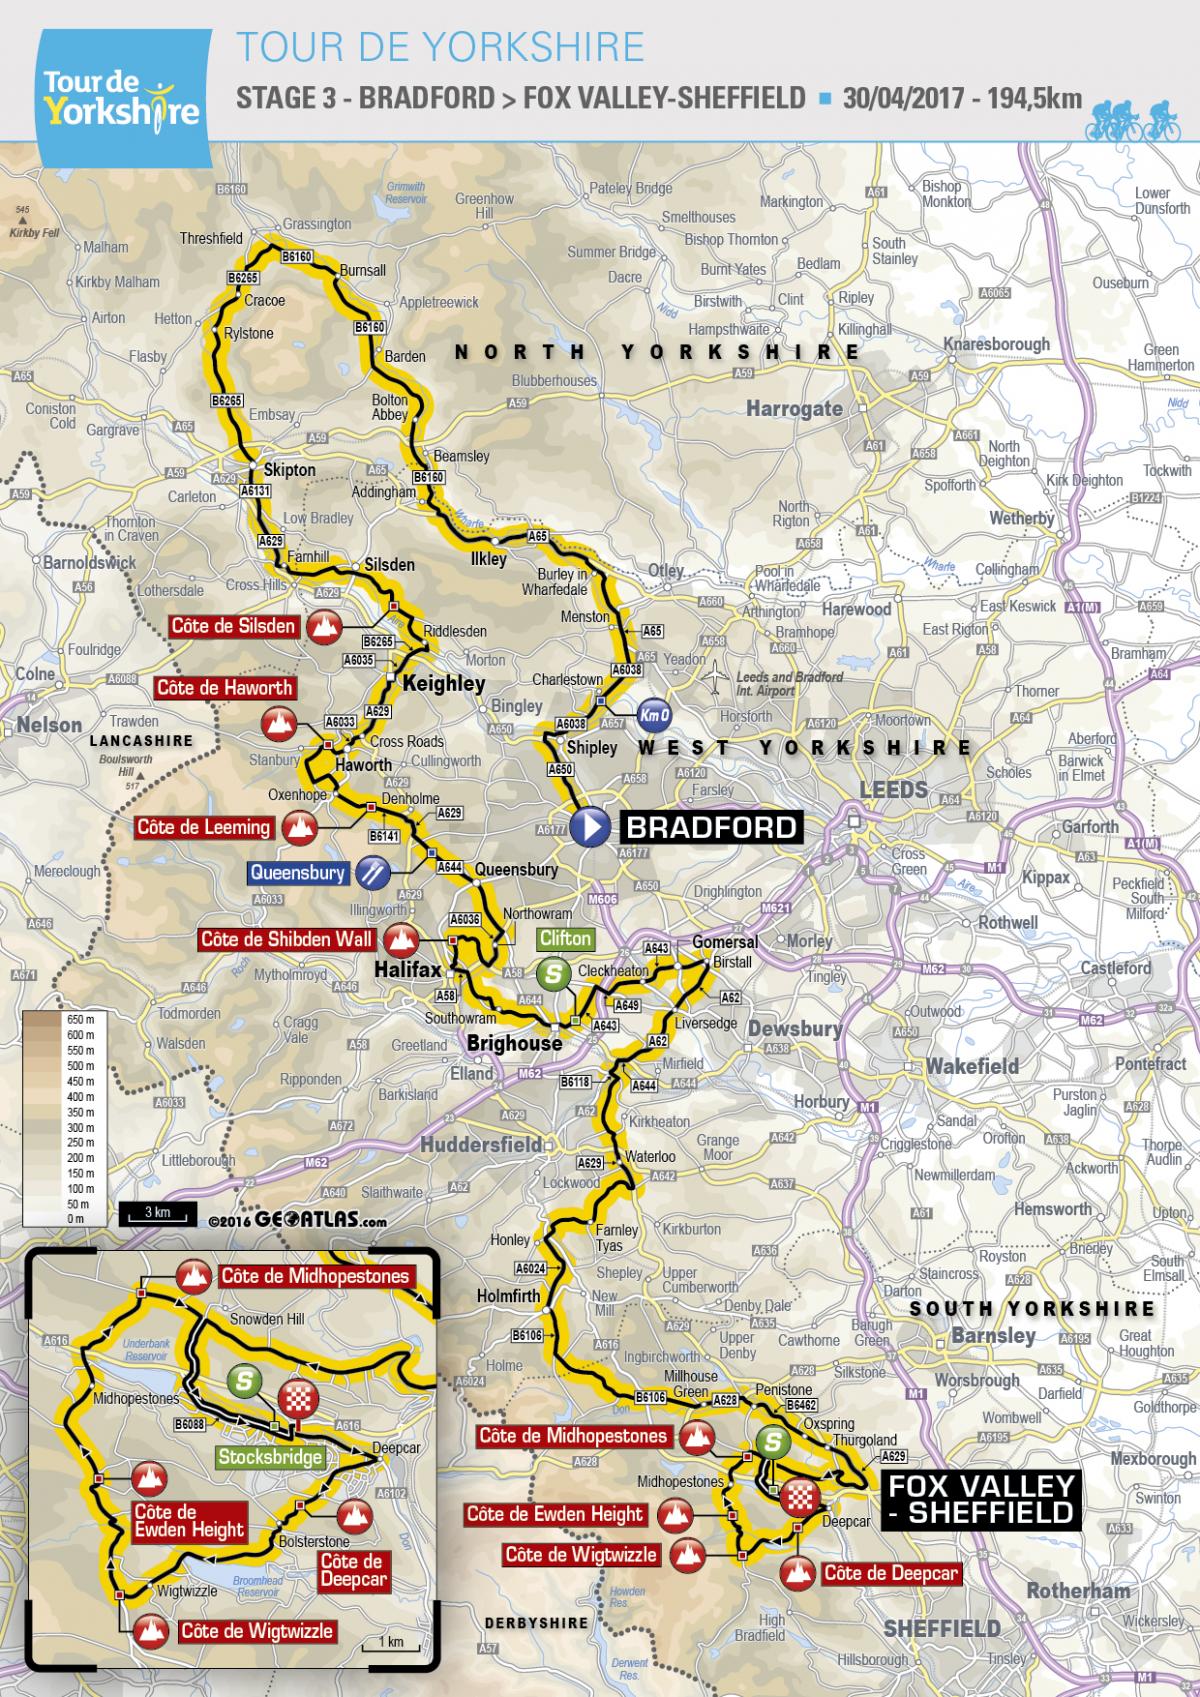 The full route for Stage 3 of the Tour de Yorkshire 2017